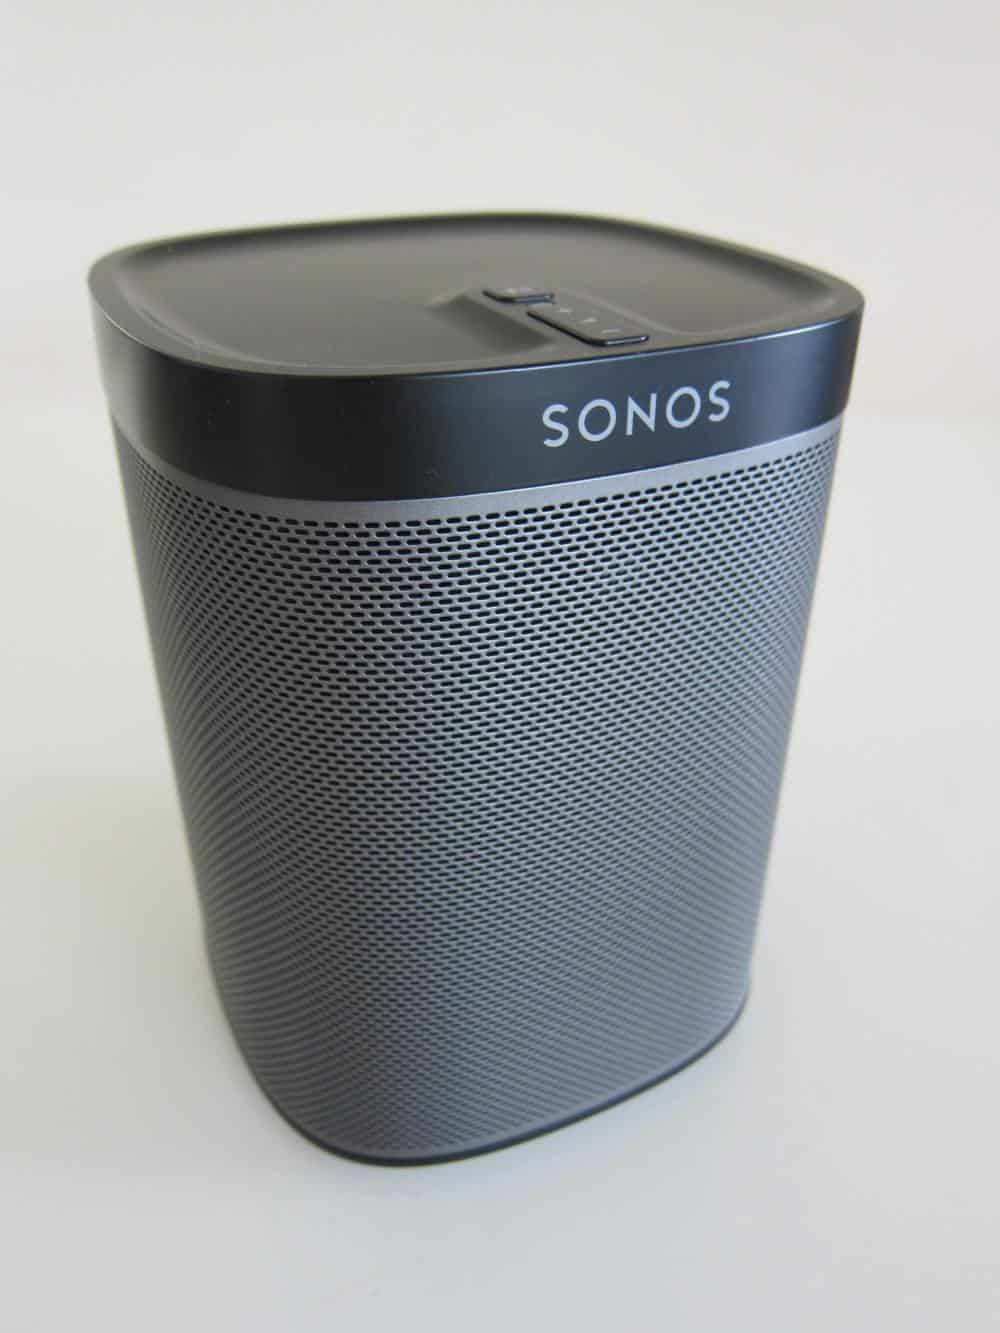 Unboxing of Sonos Play One